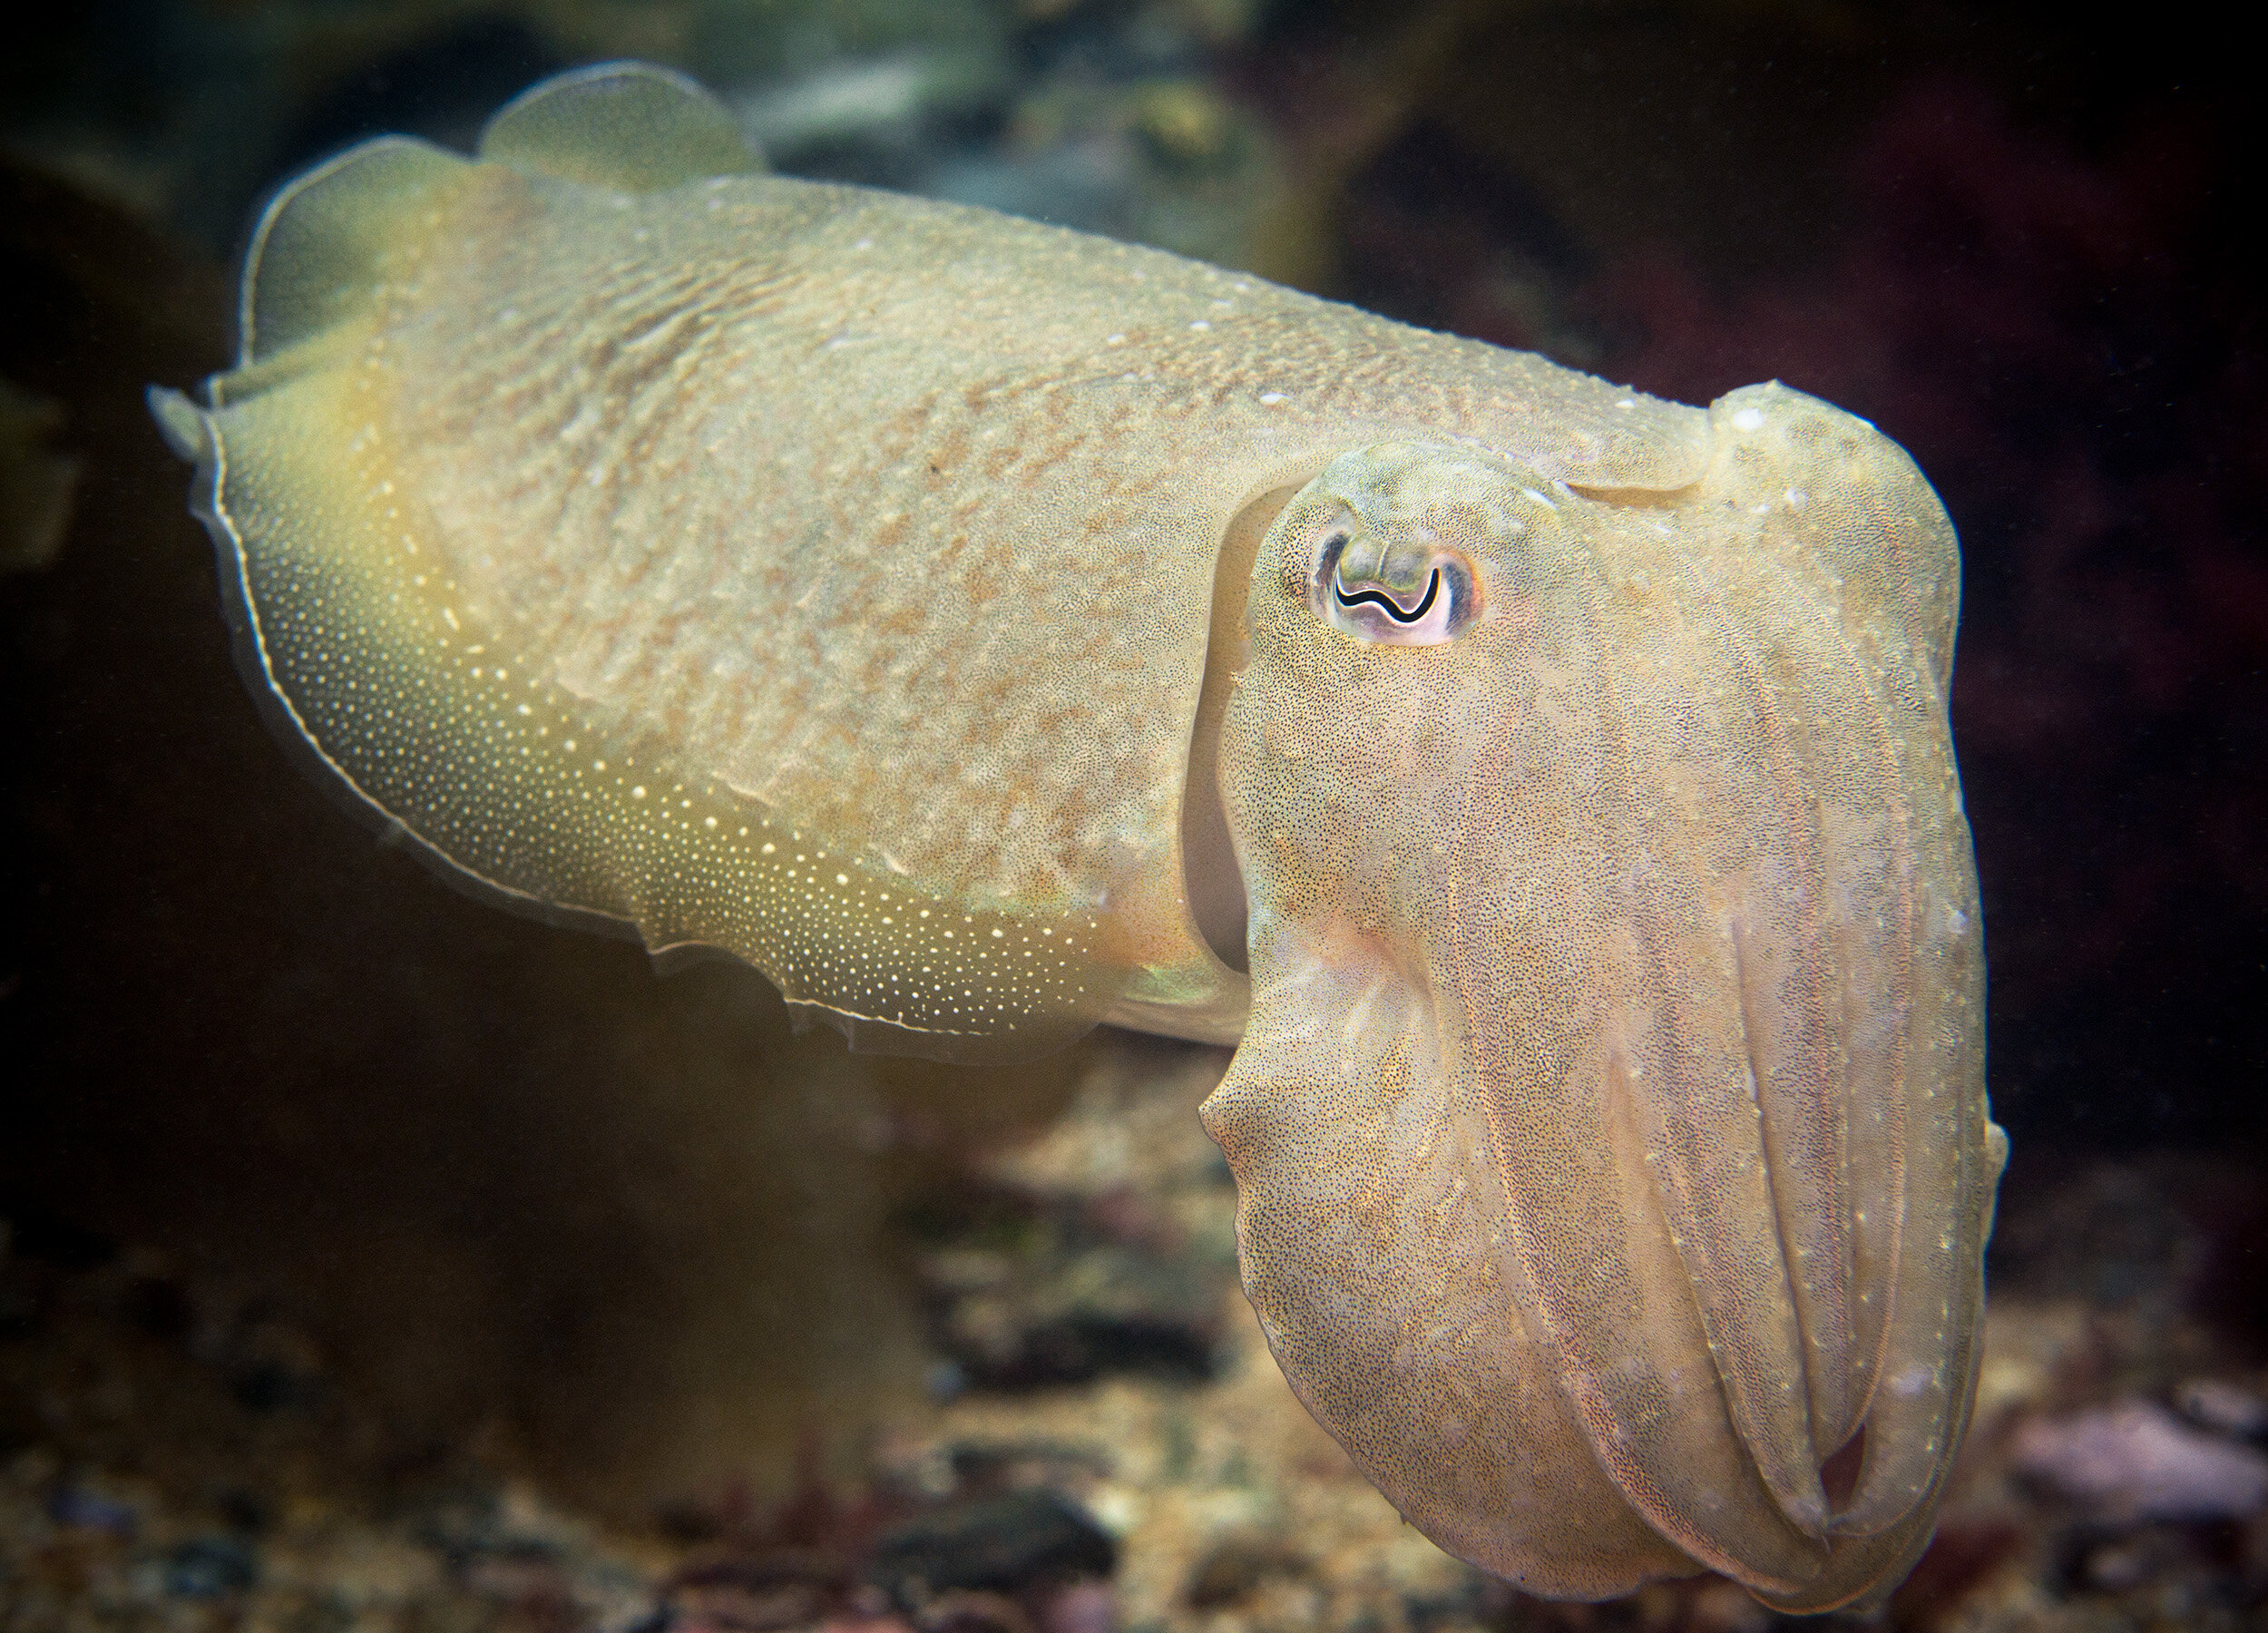  Common cuttlefish - Sepia officinalis 